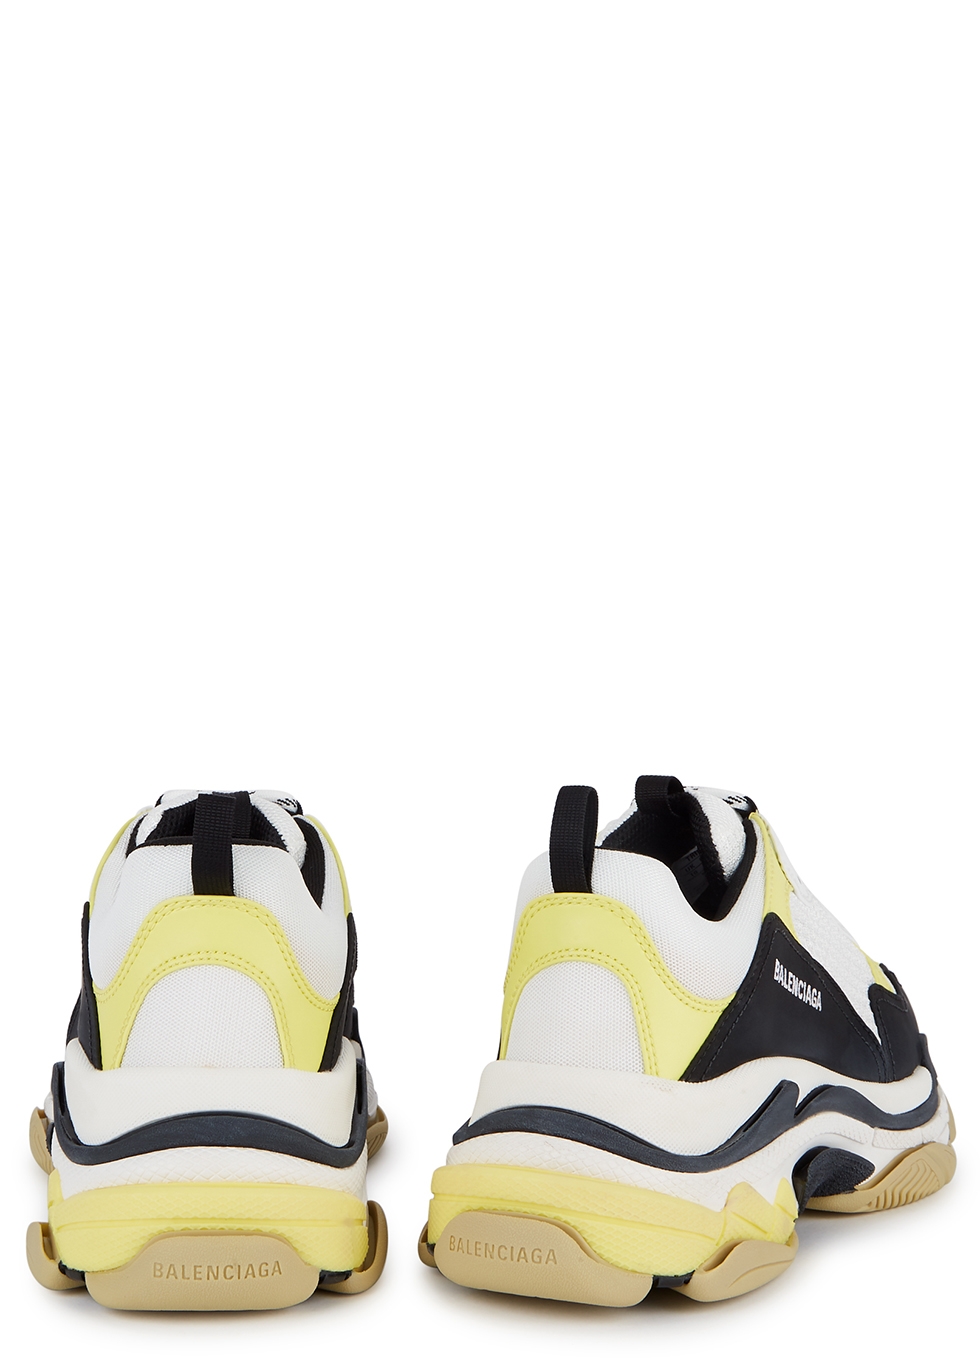 How to get Balenciaga Triple S Trainers Jaune Fluo sneakers